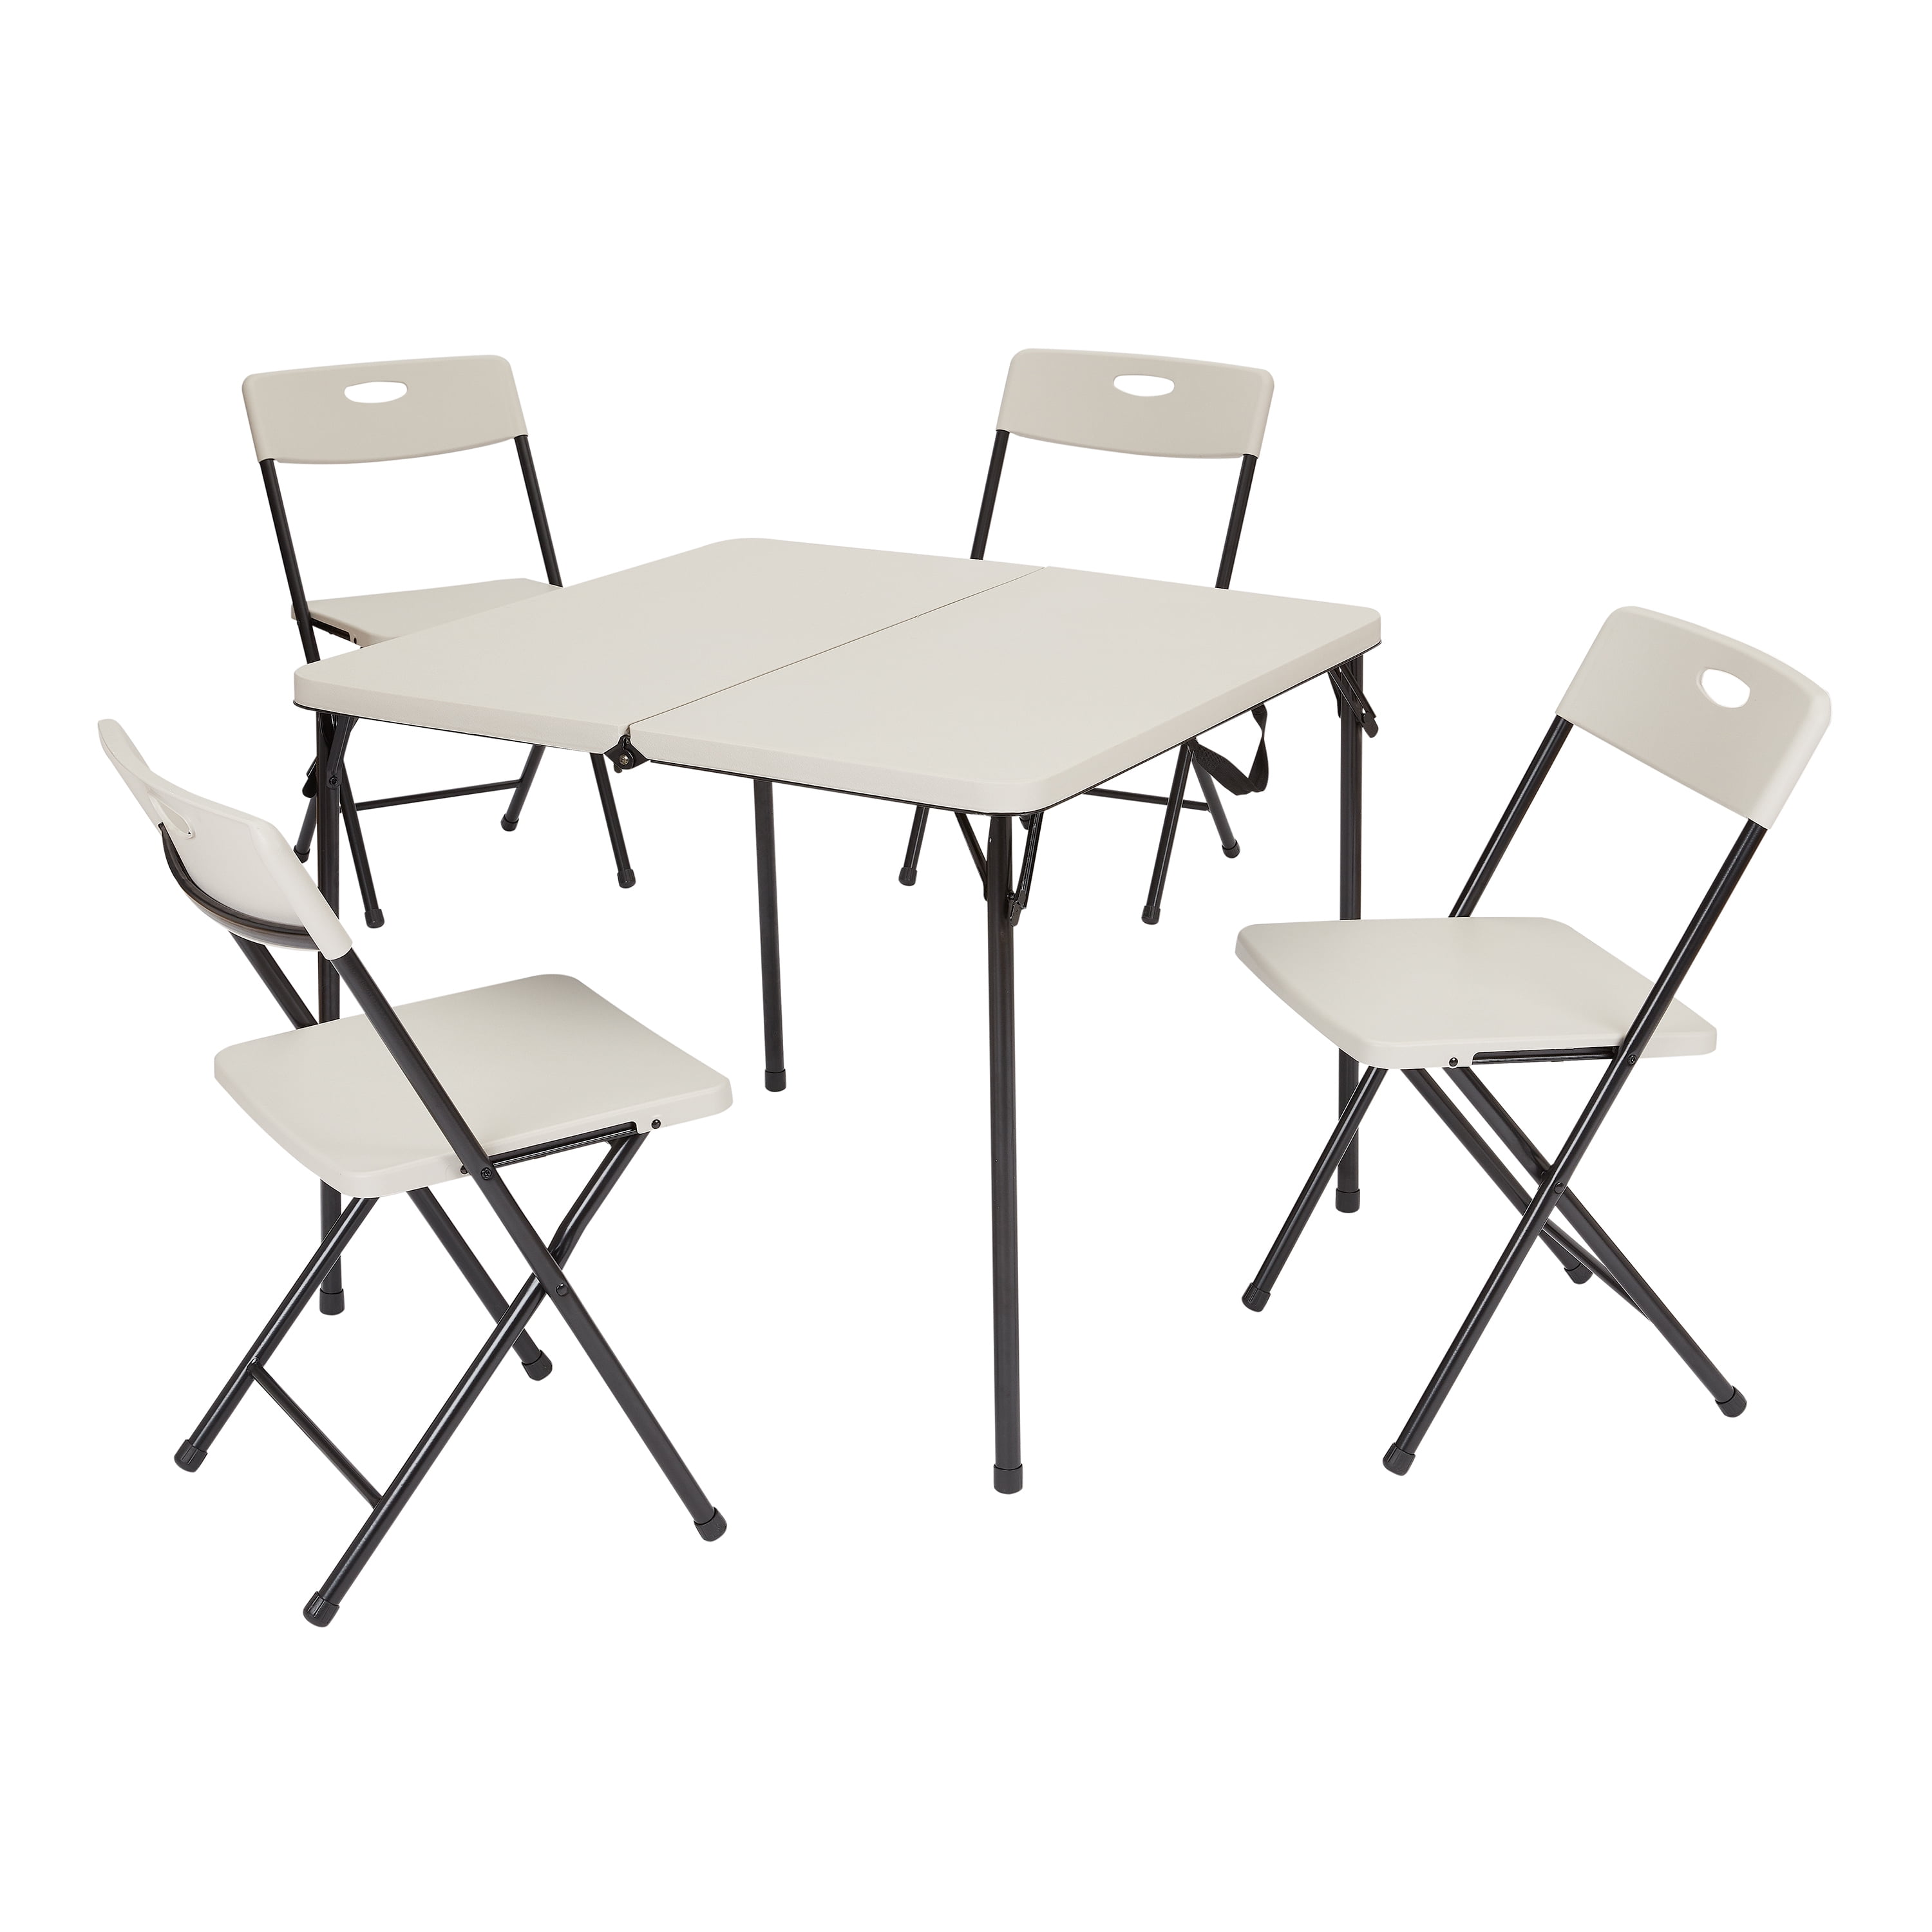 card table chairs at walmart